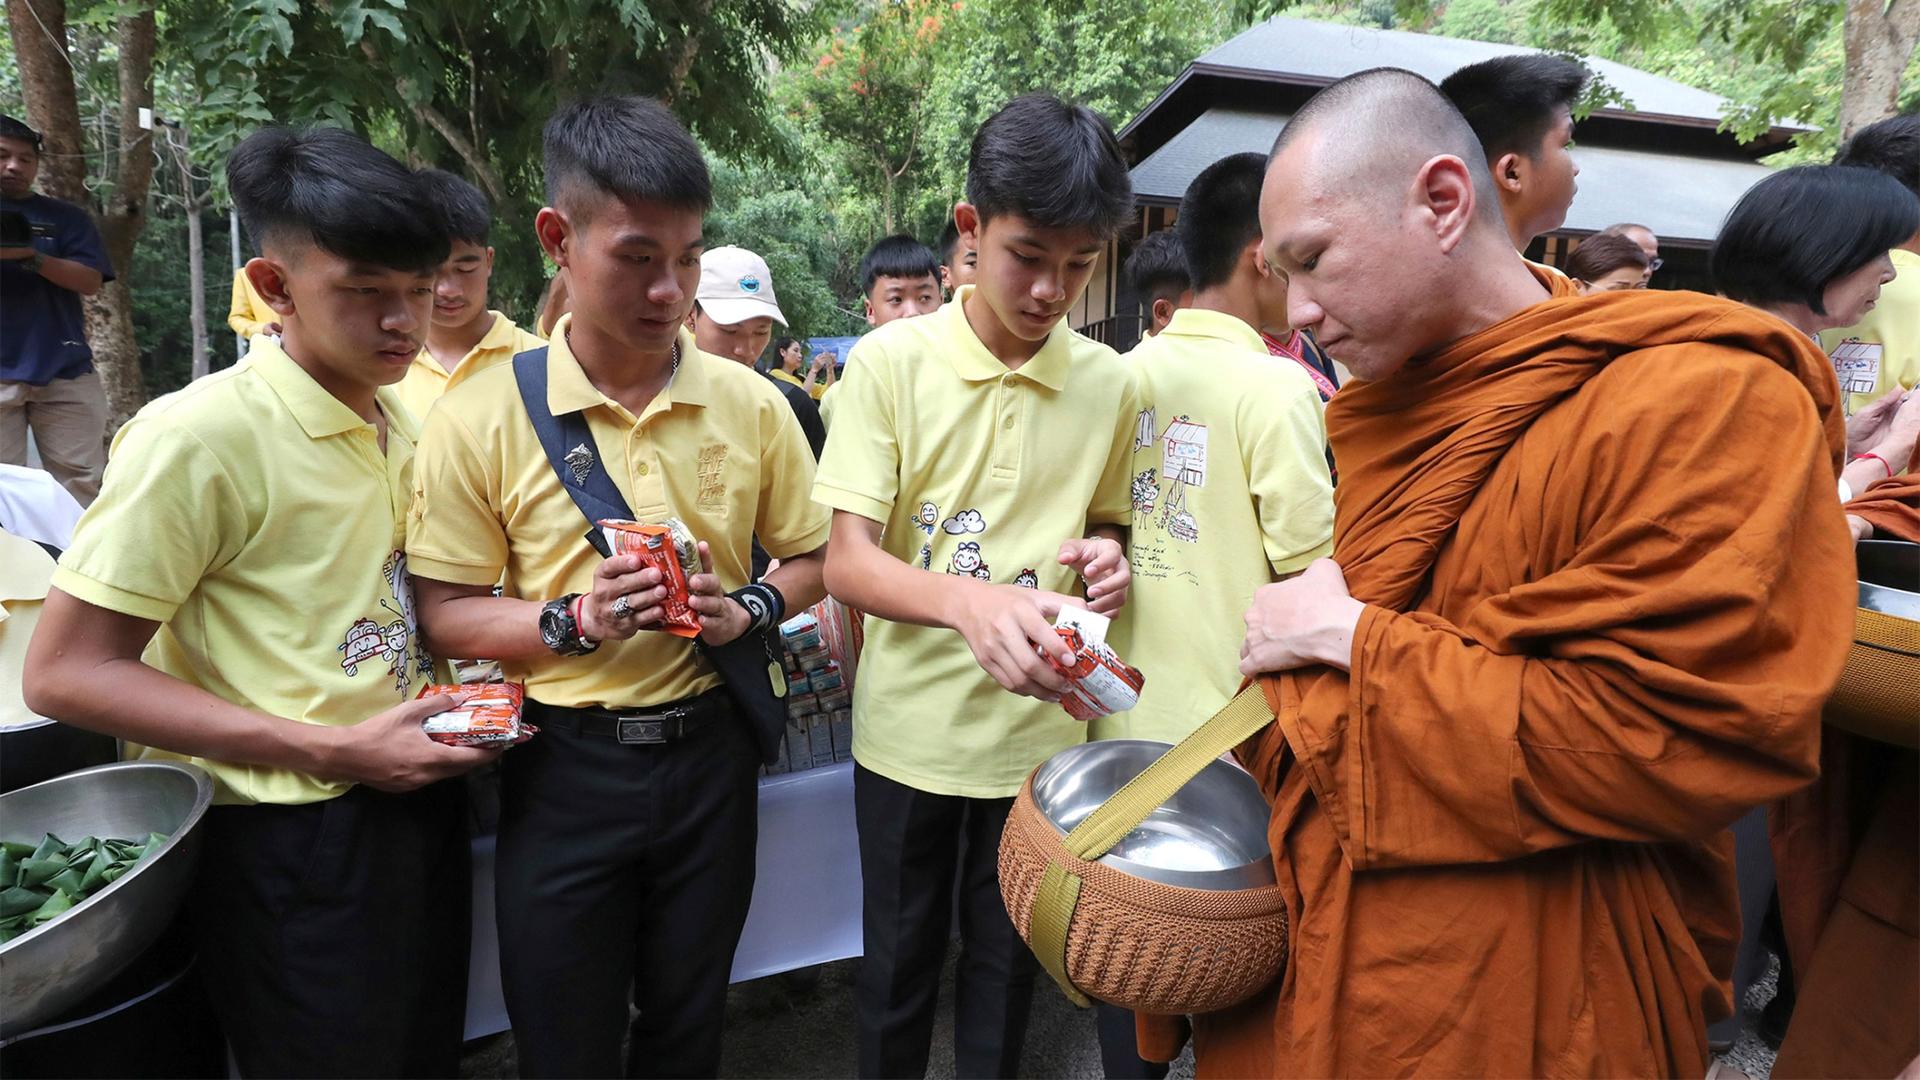 Members of the Wild Boars soccer team who were rescued from a flooded cave, offer foods to a Buddhist monk near the Tham Luang cave in Mae Sai, Chiang Rai province, Thailand, to mark one year since their rescue